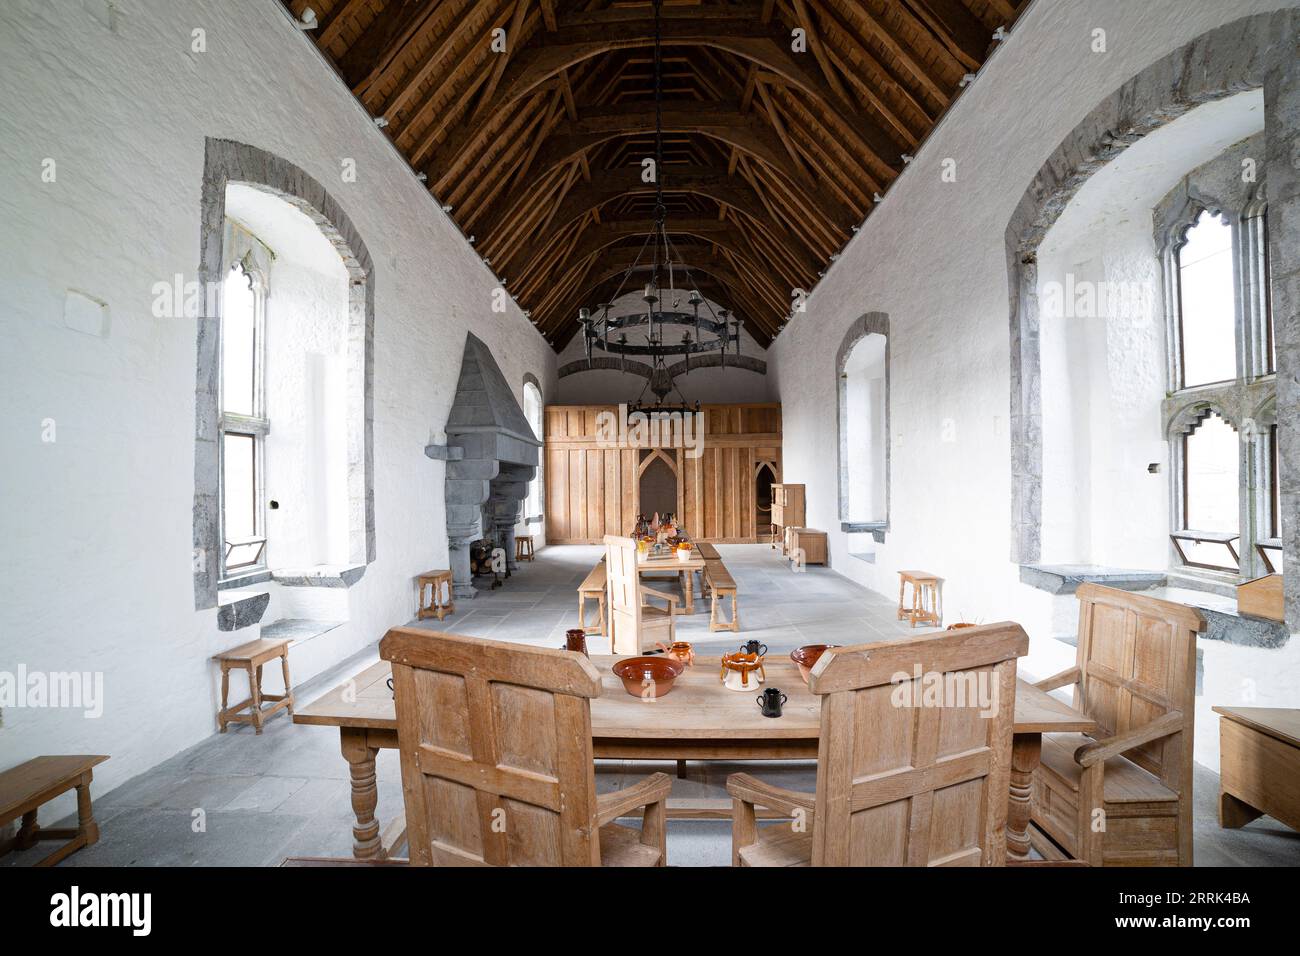 Medieval Castle Banqueting Hall Stock Photo